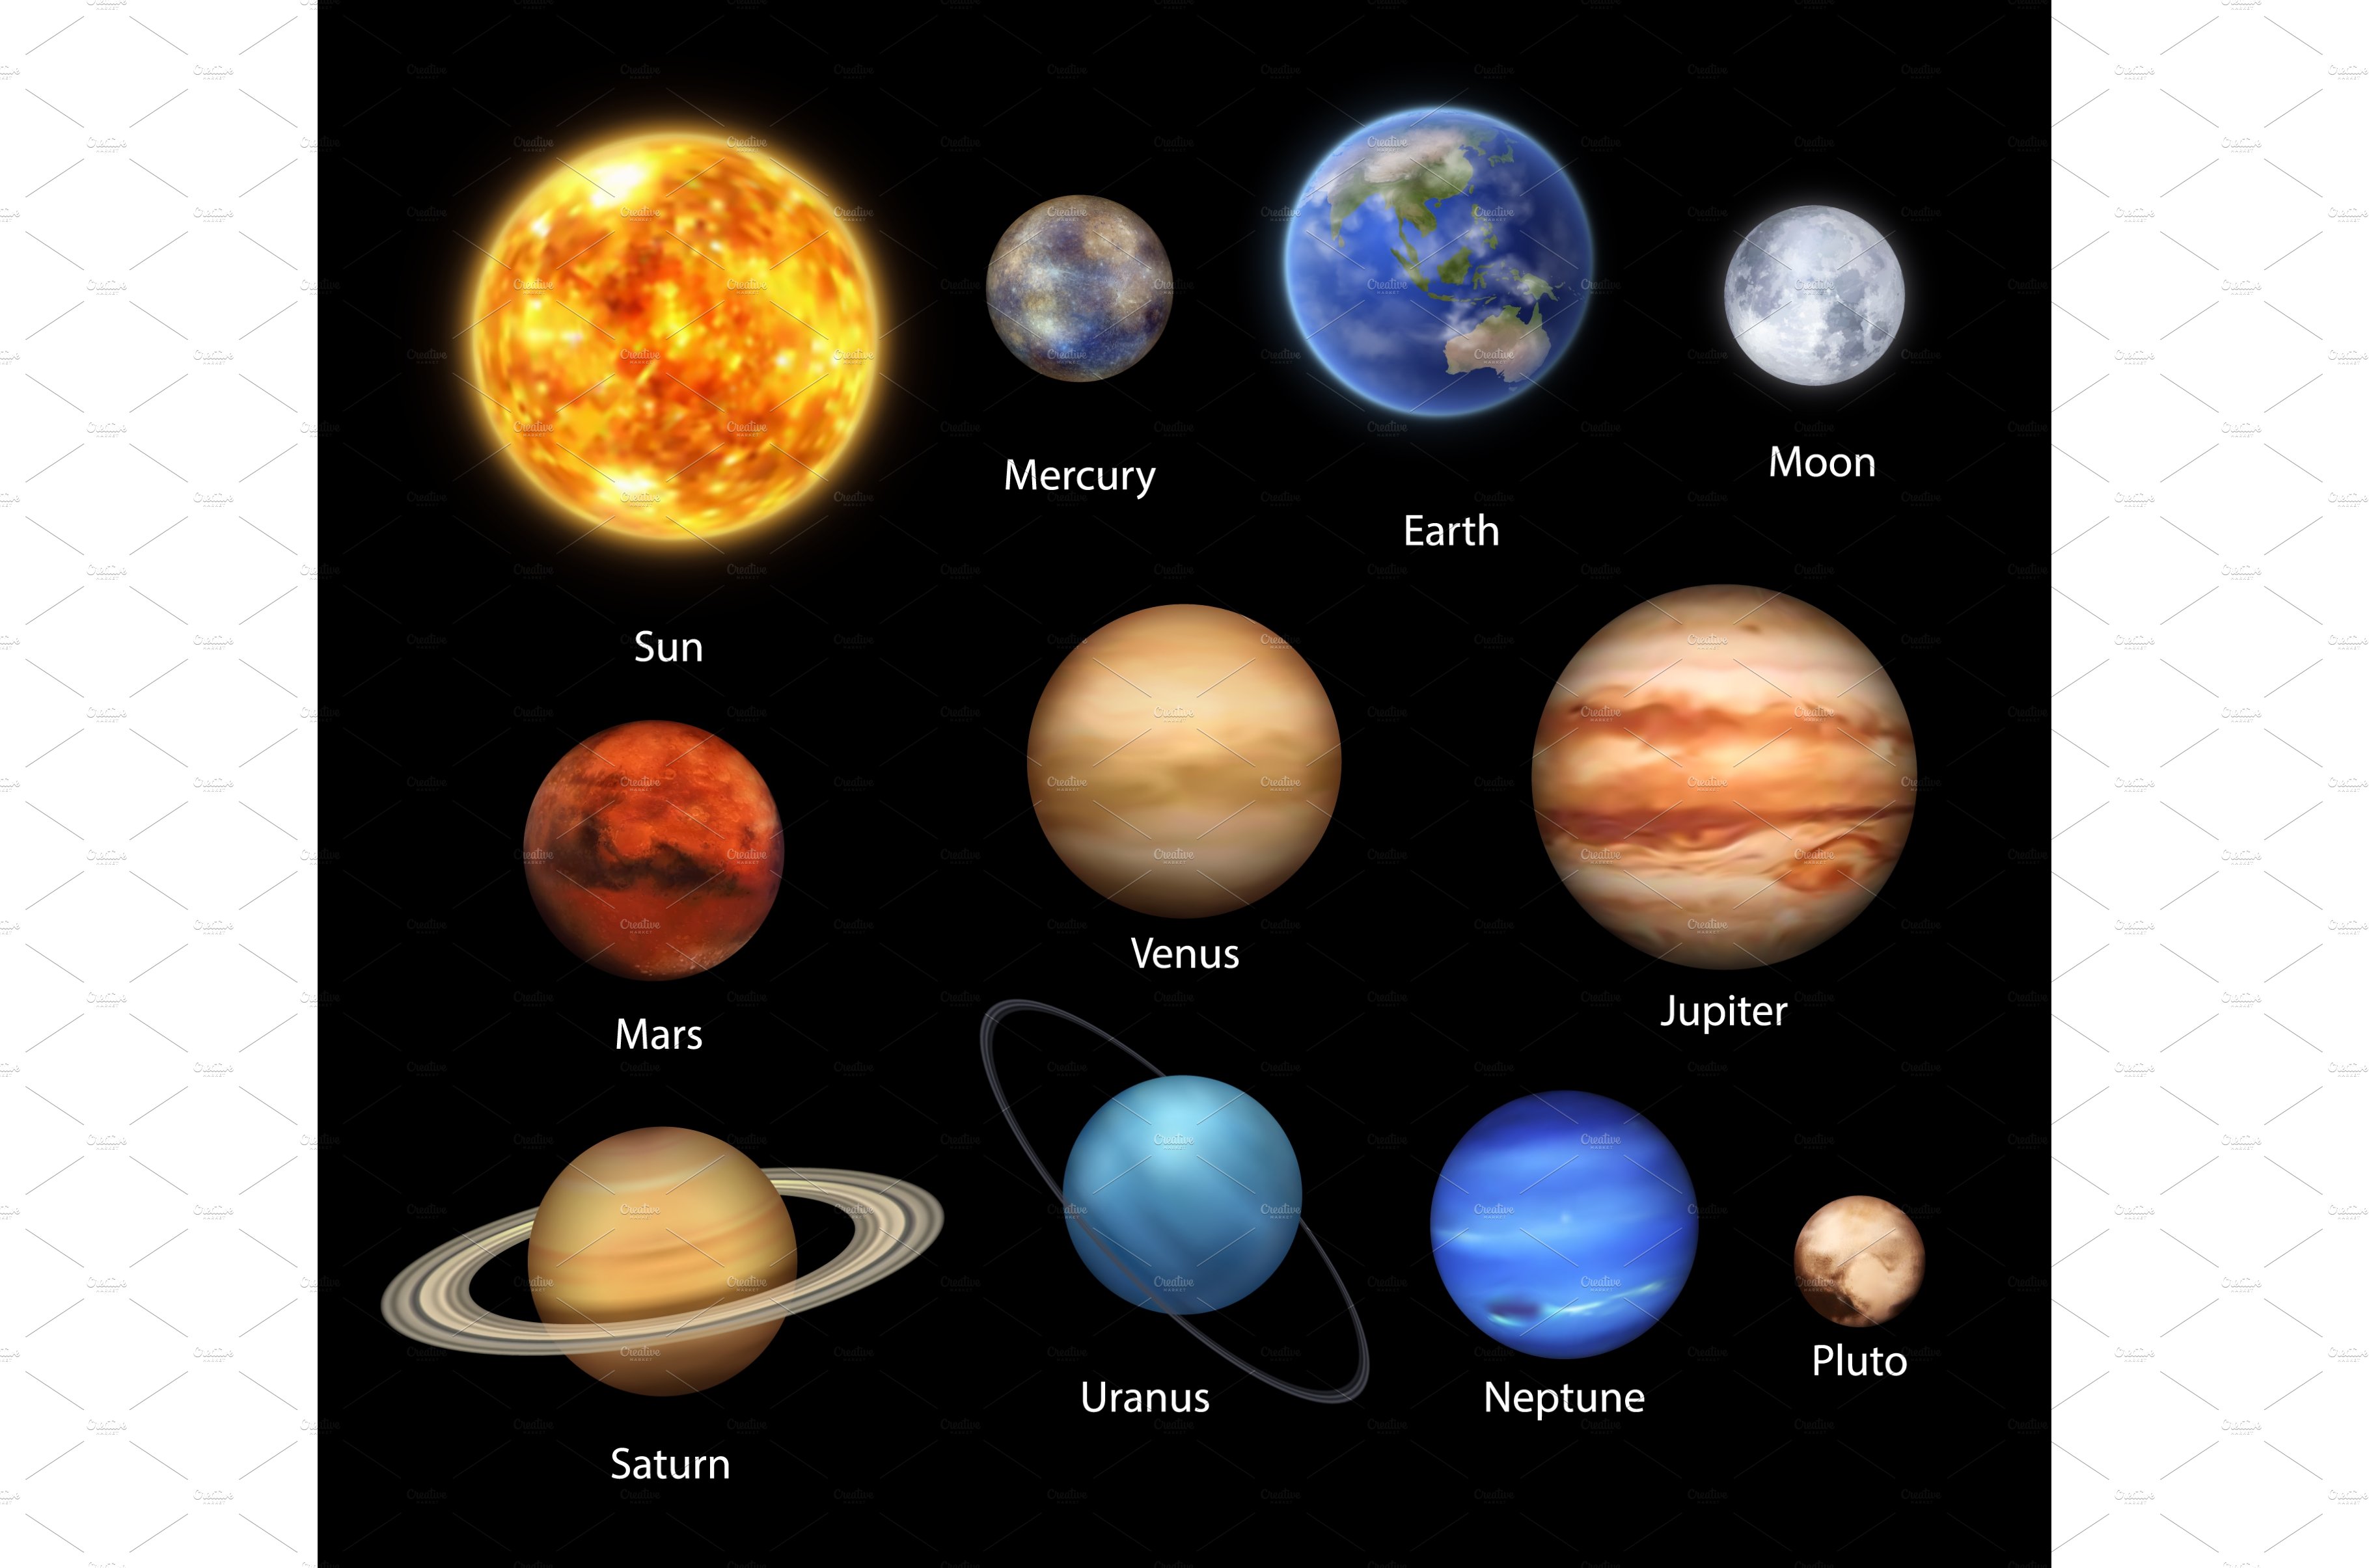 Planets of Solar System, space cover image.